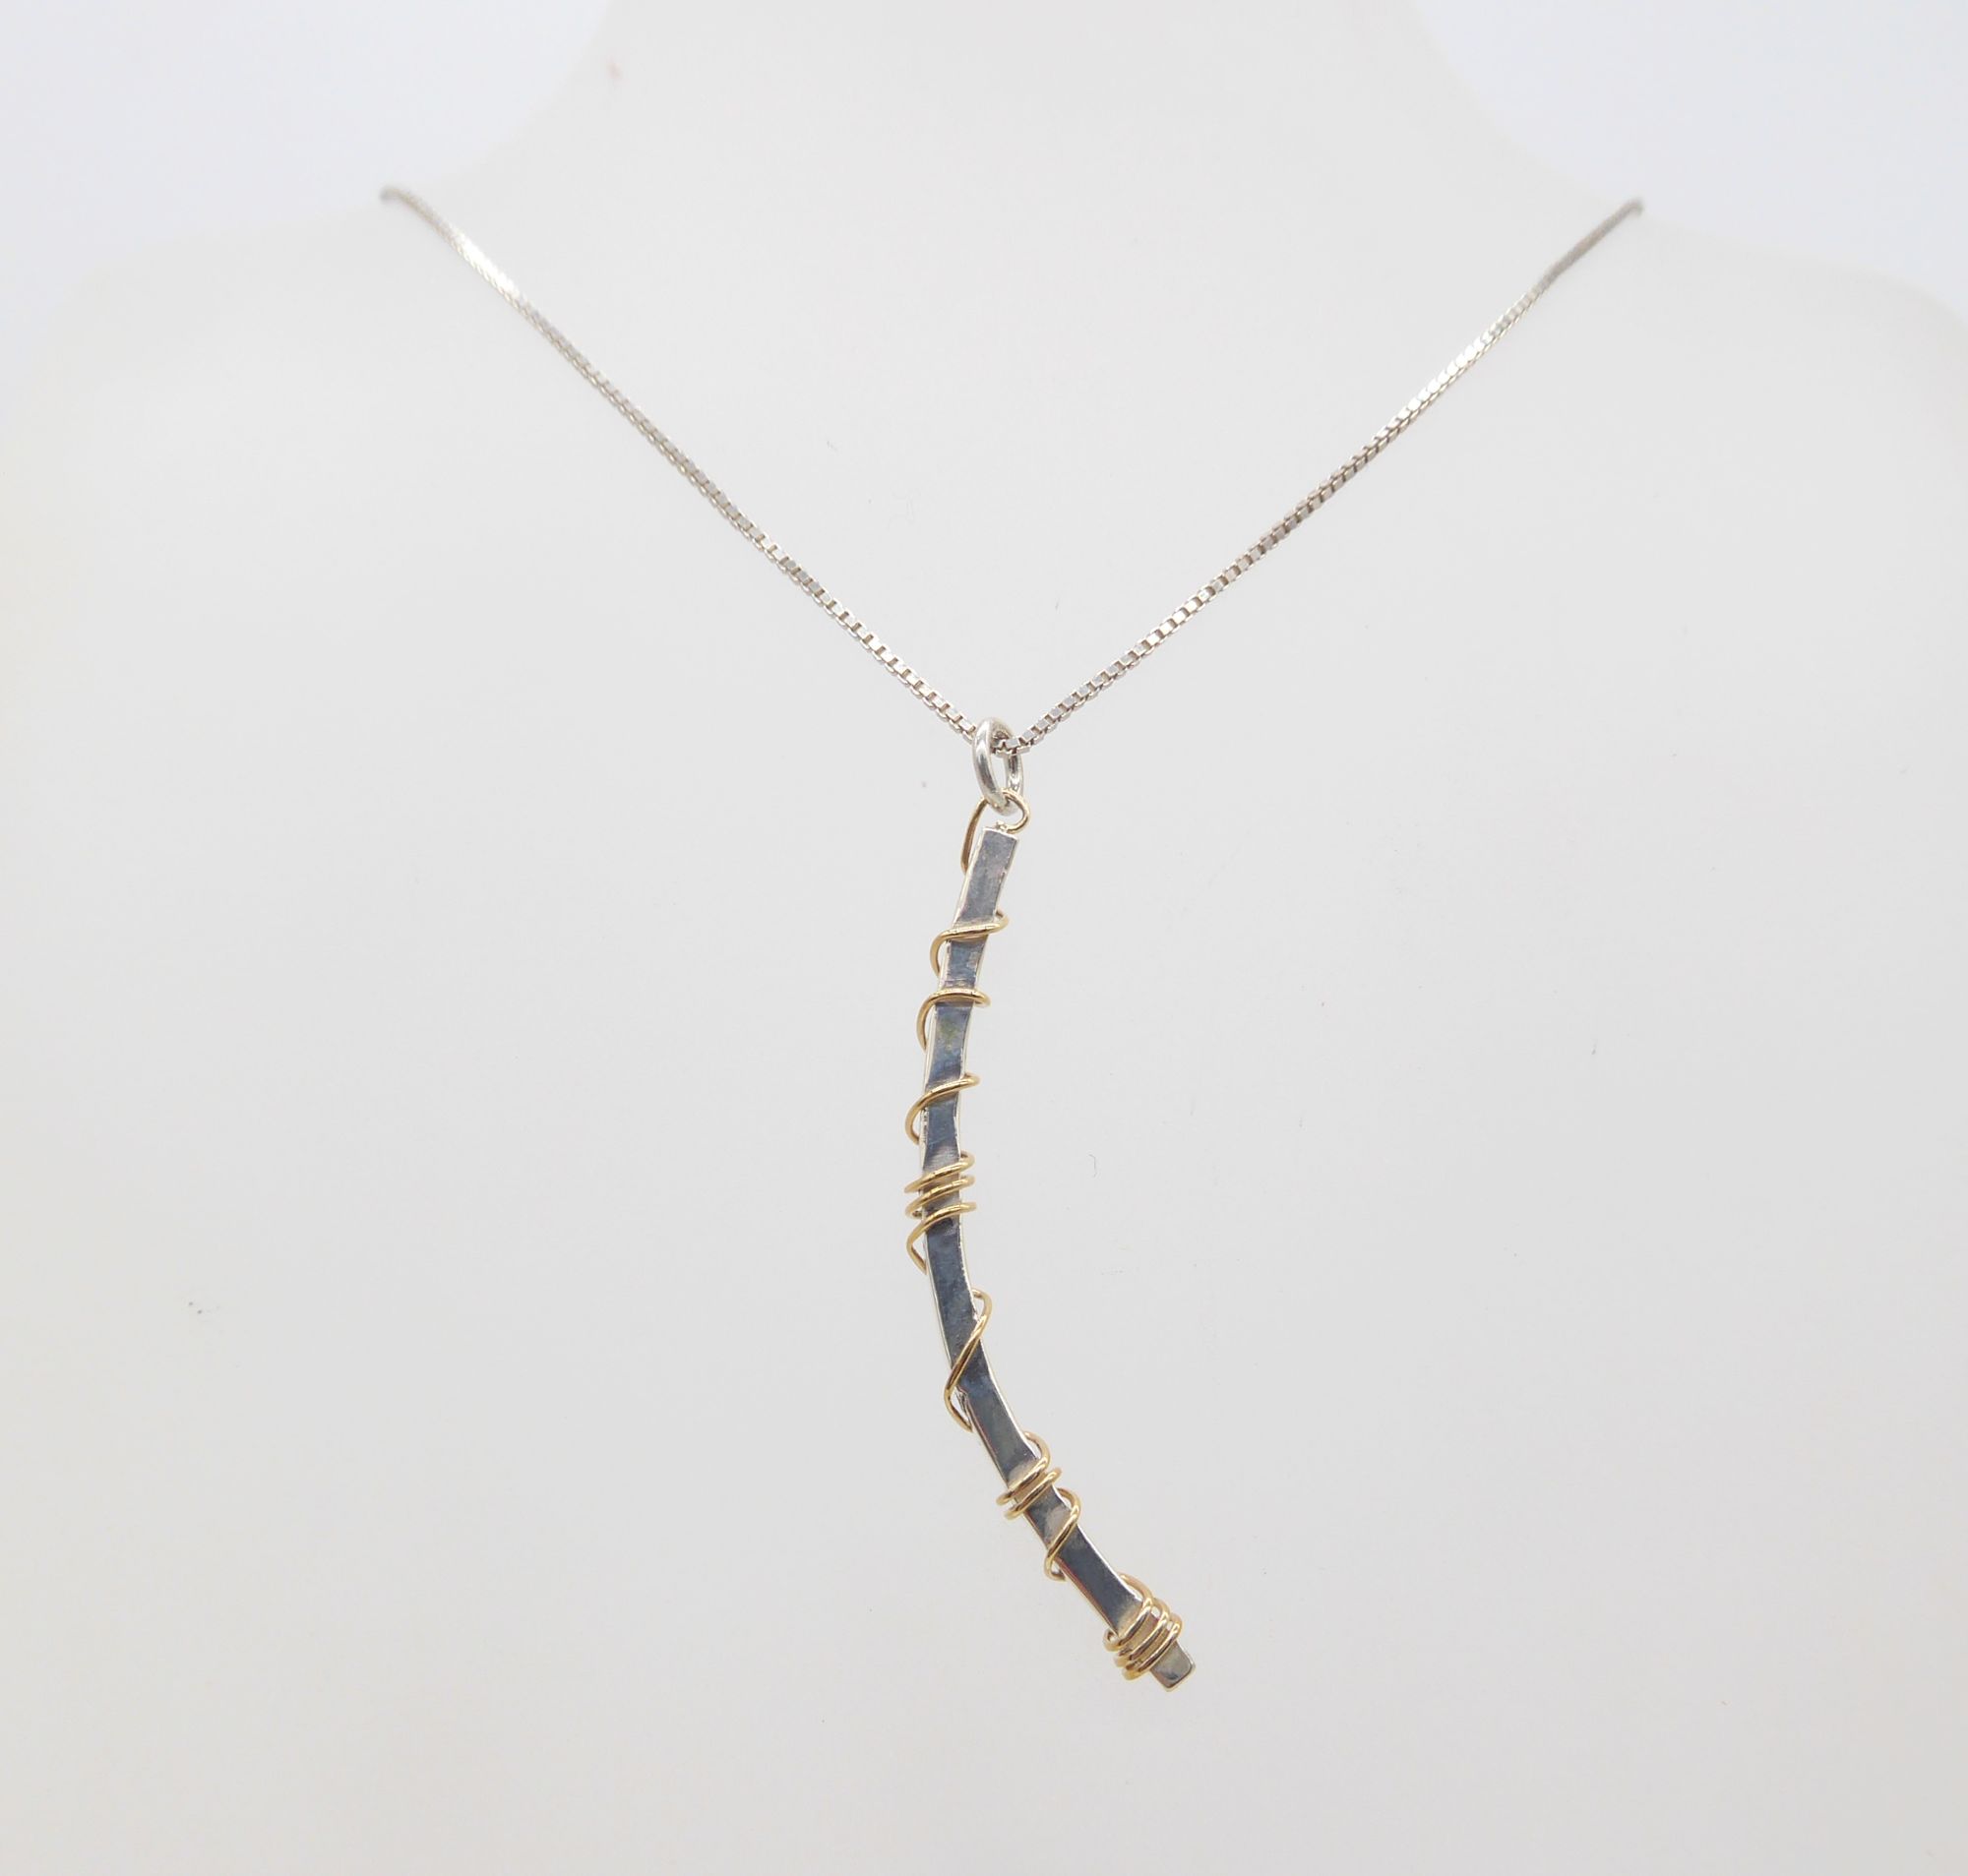 Silver and gold wire pendant